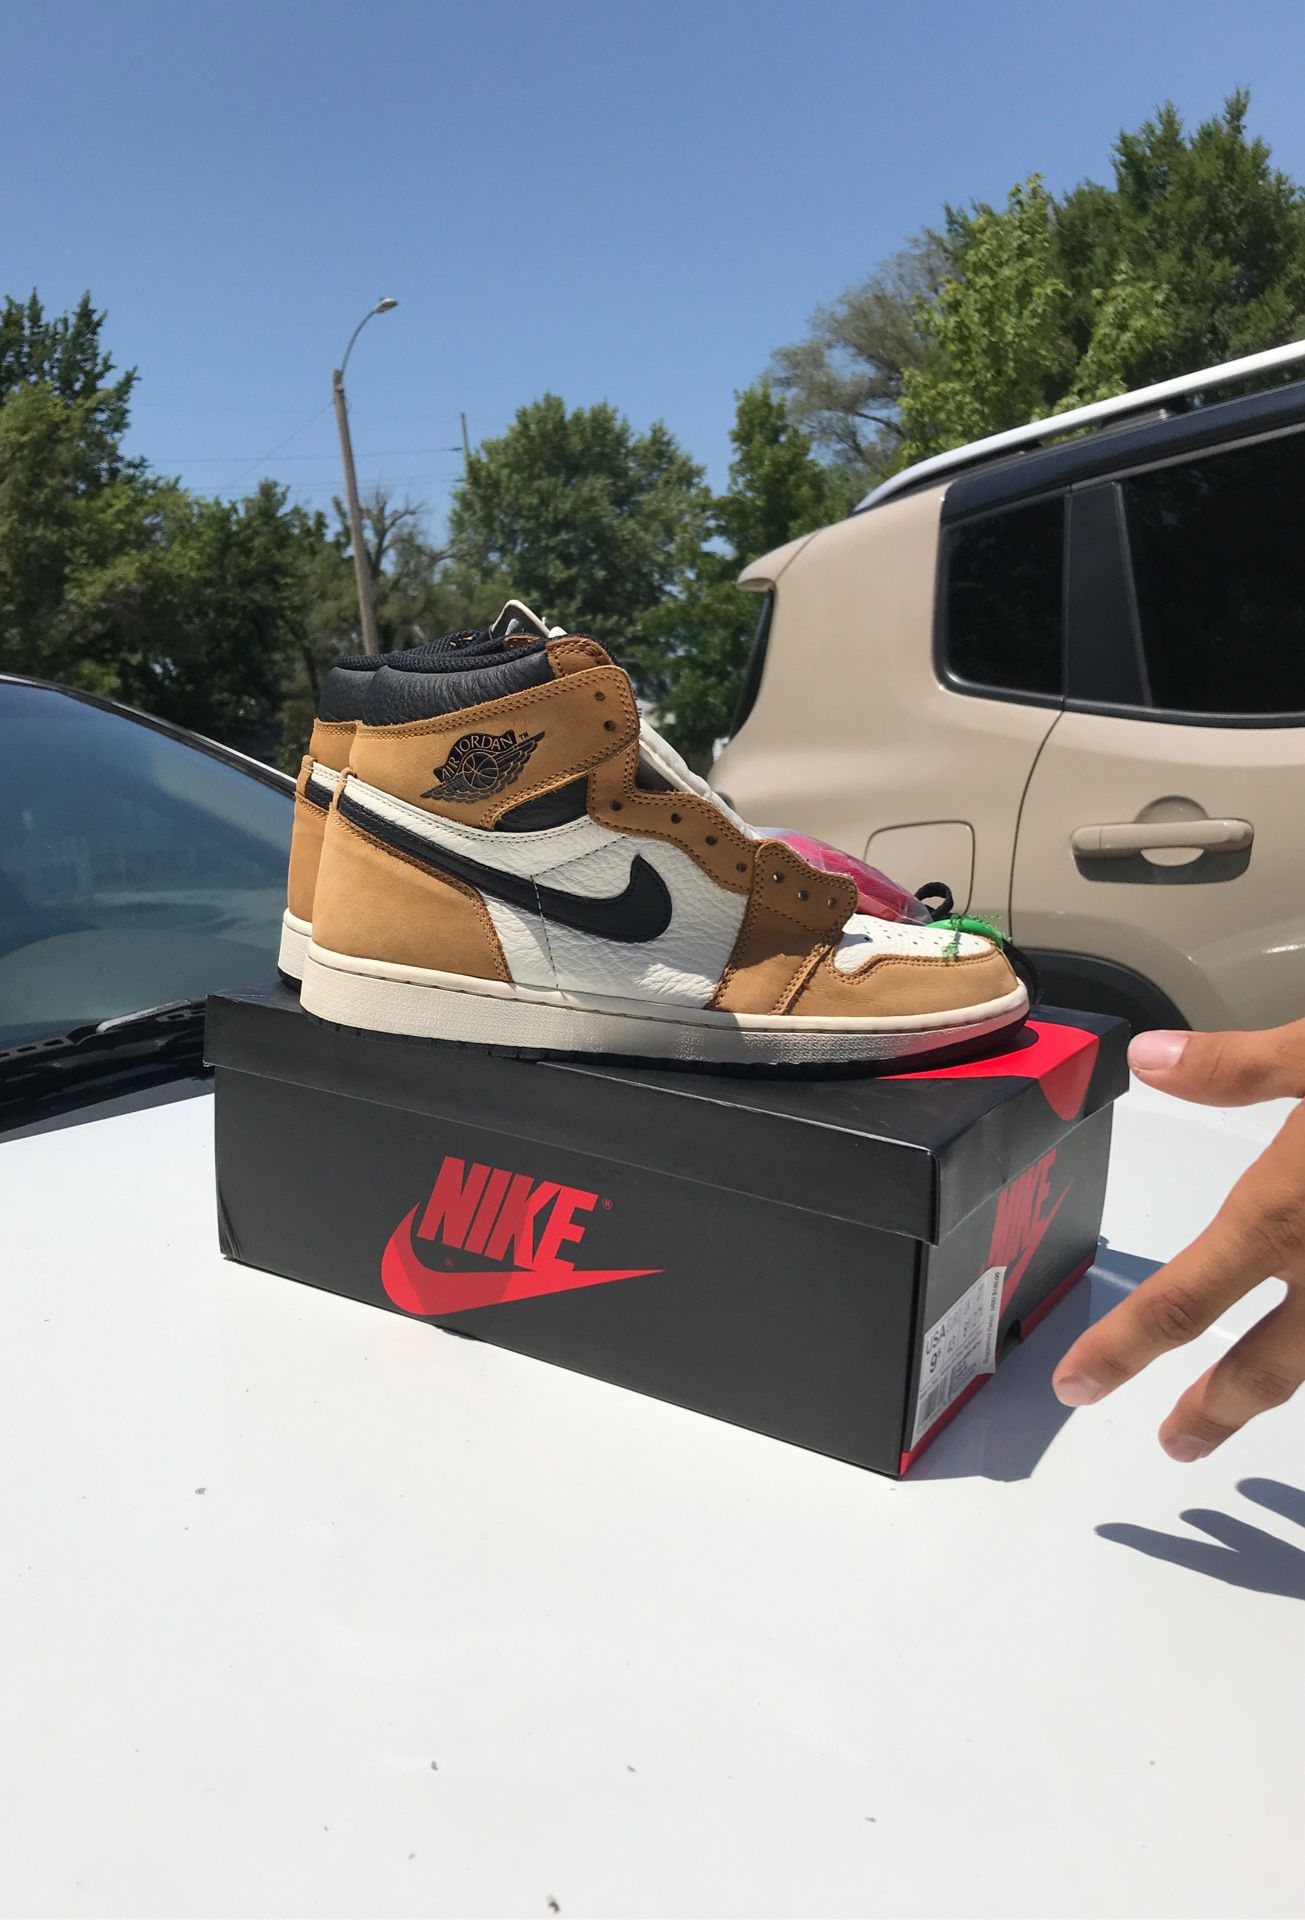 Jordan 1 rookie of the year size 9.5